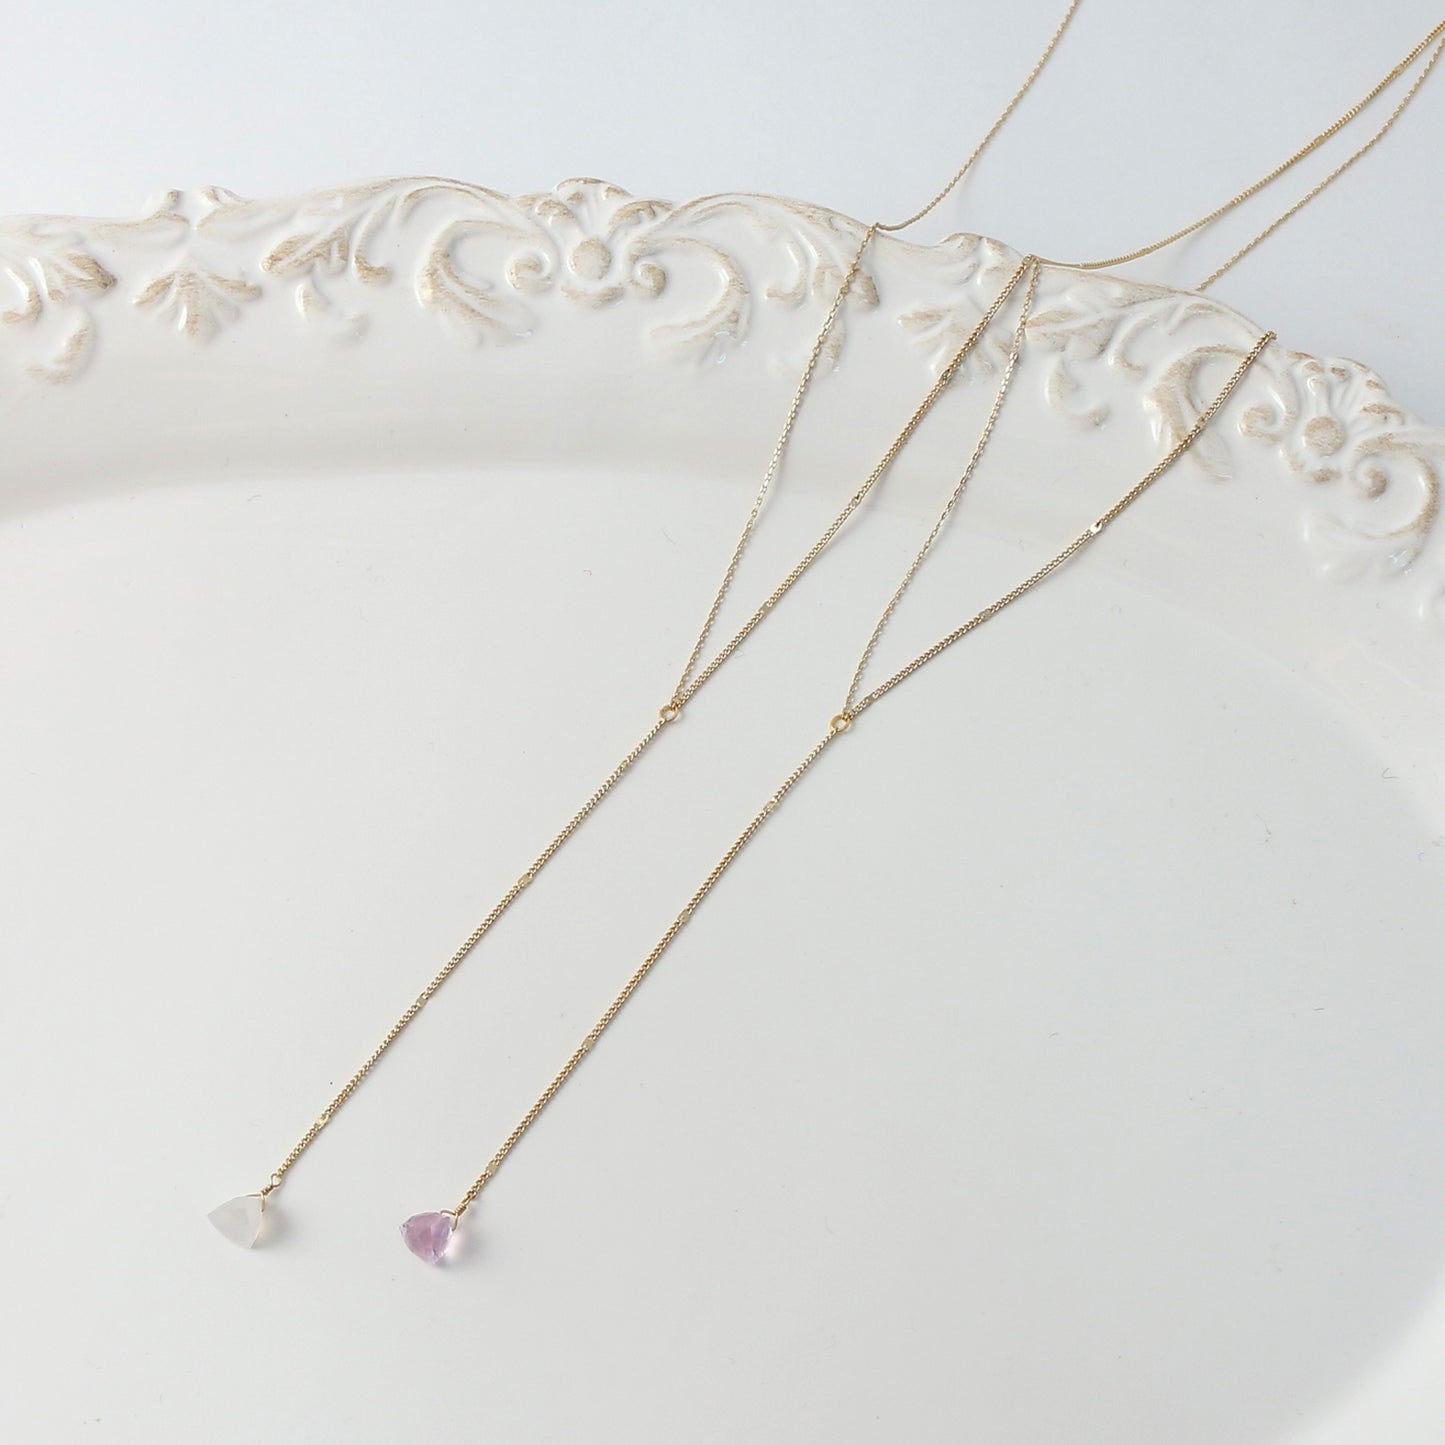 Necklace of White Calcedney and Pink Amethyst